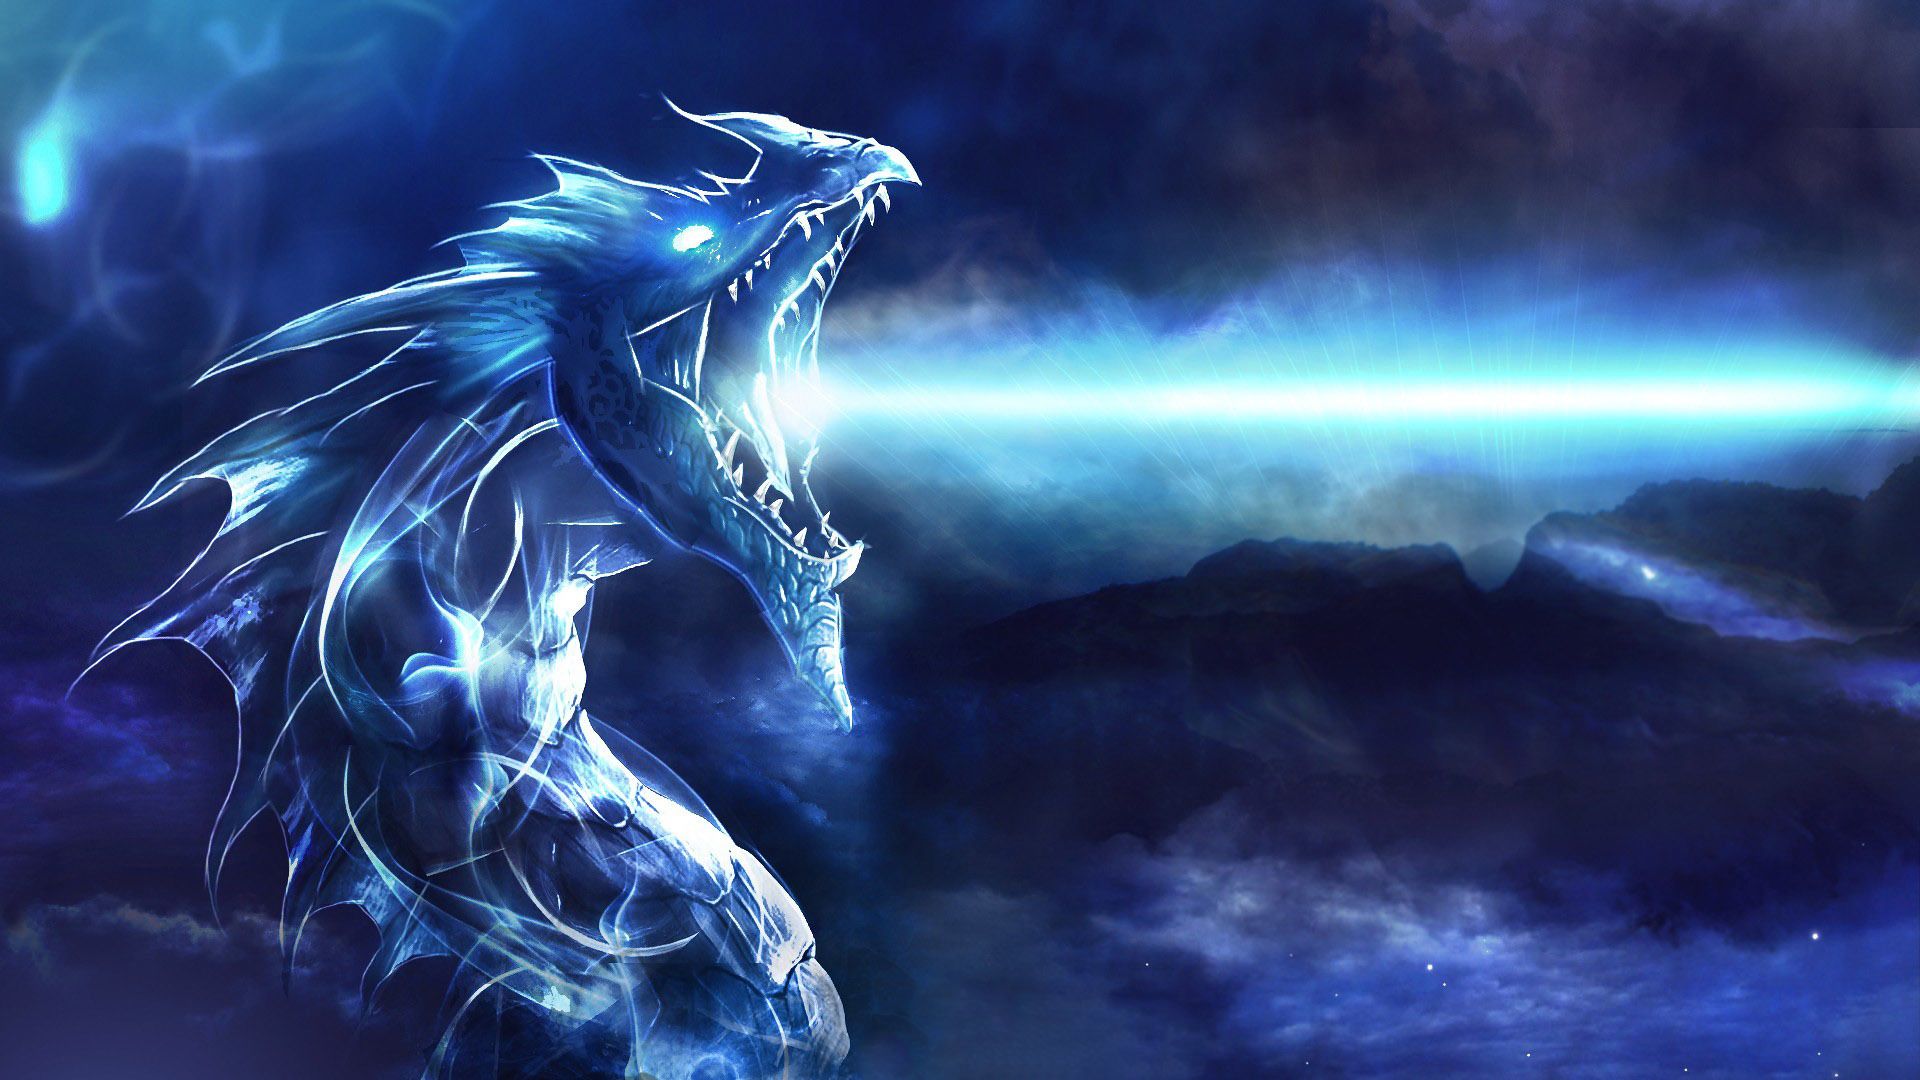 Coolest Dragon Wallpapers Wallpapers